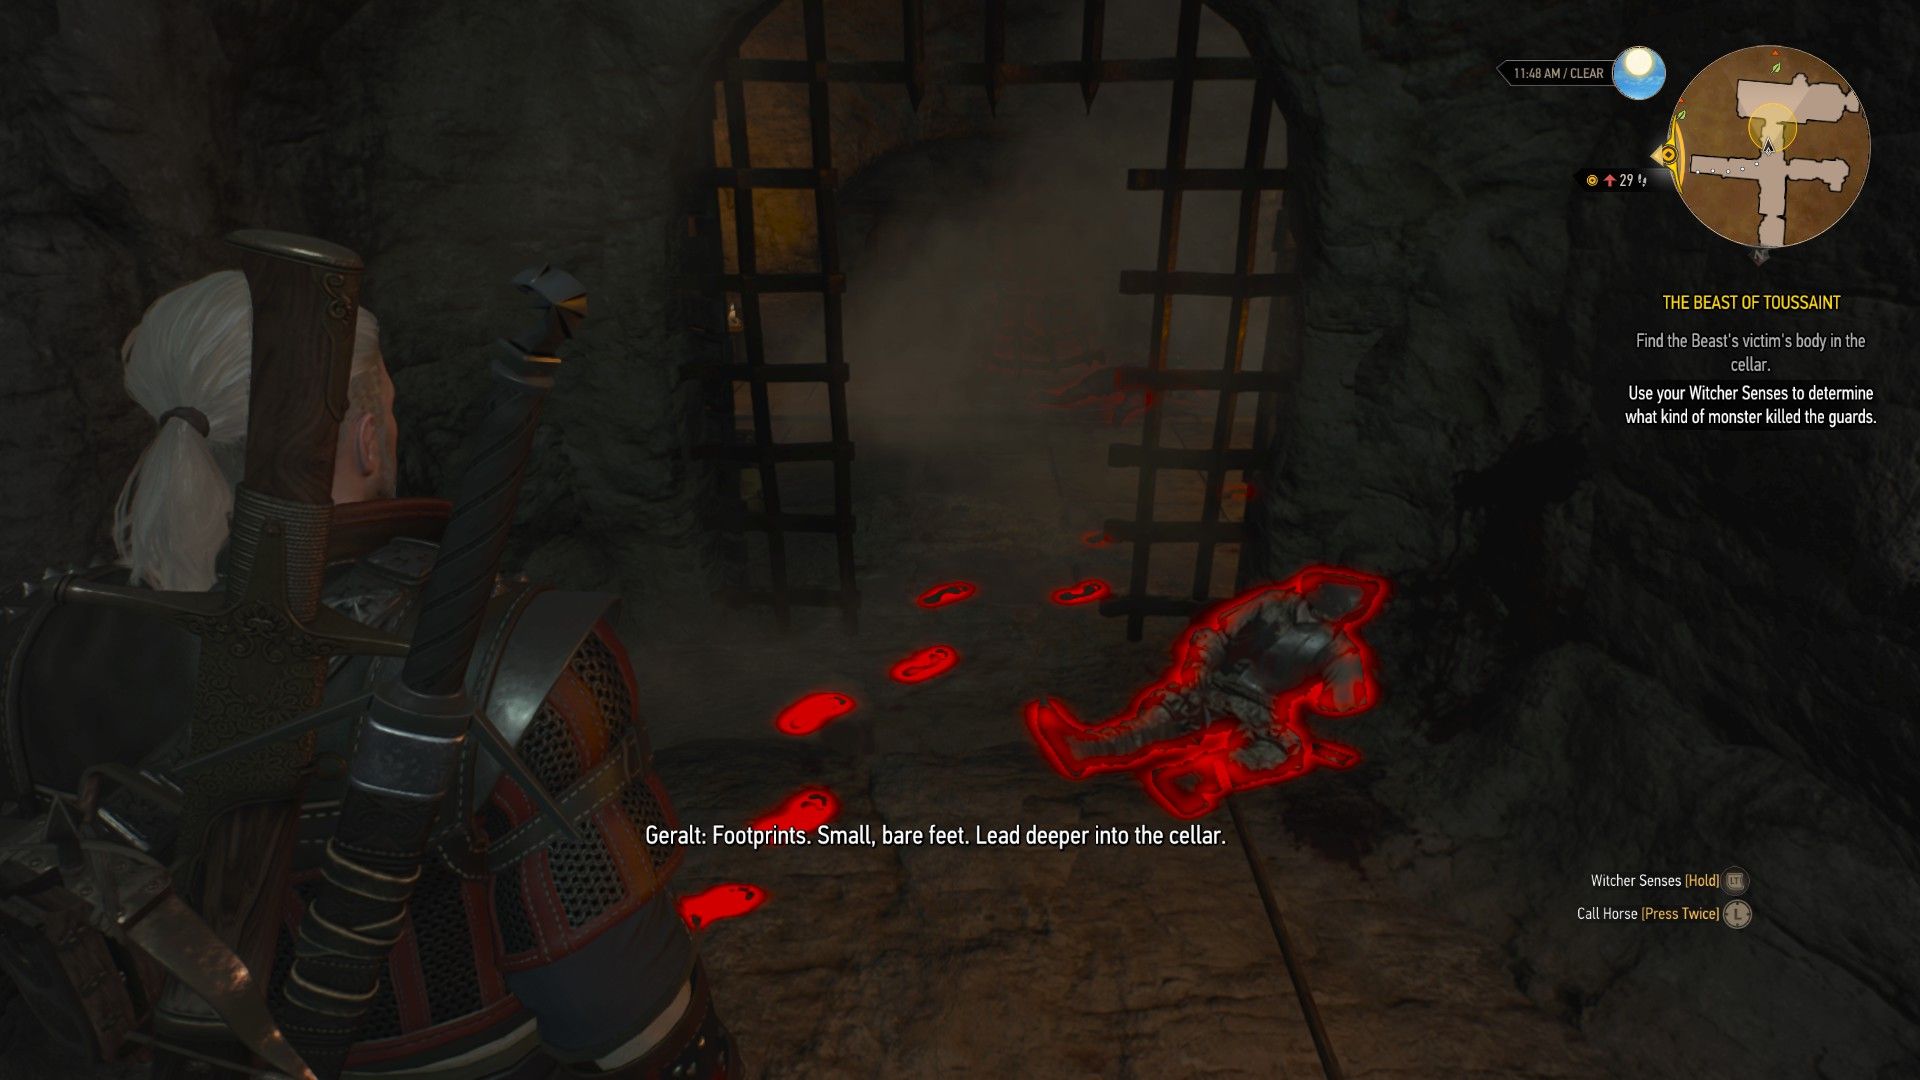 A screenshot of Geralt looking at a series of footprints next to a mutilated corpse in the basement.